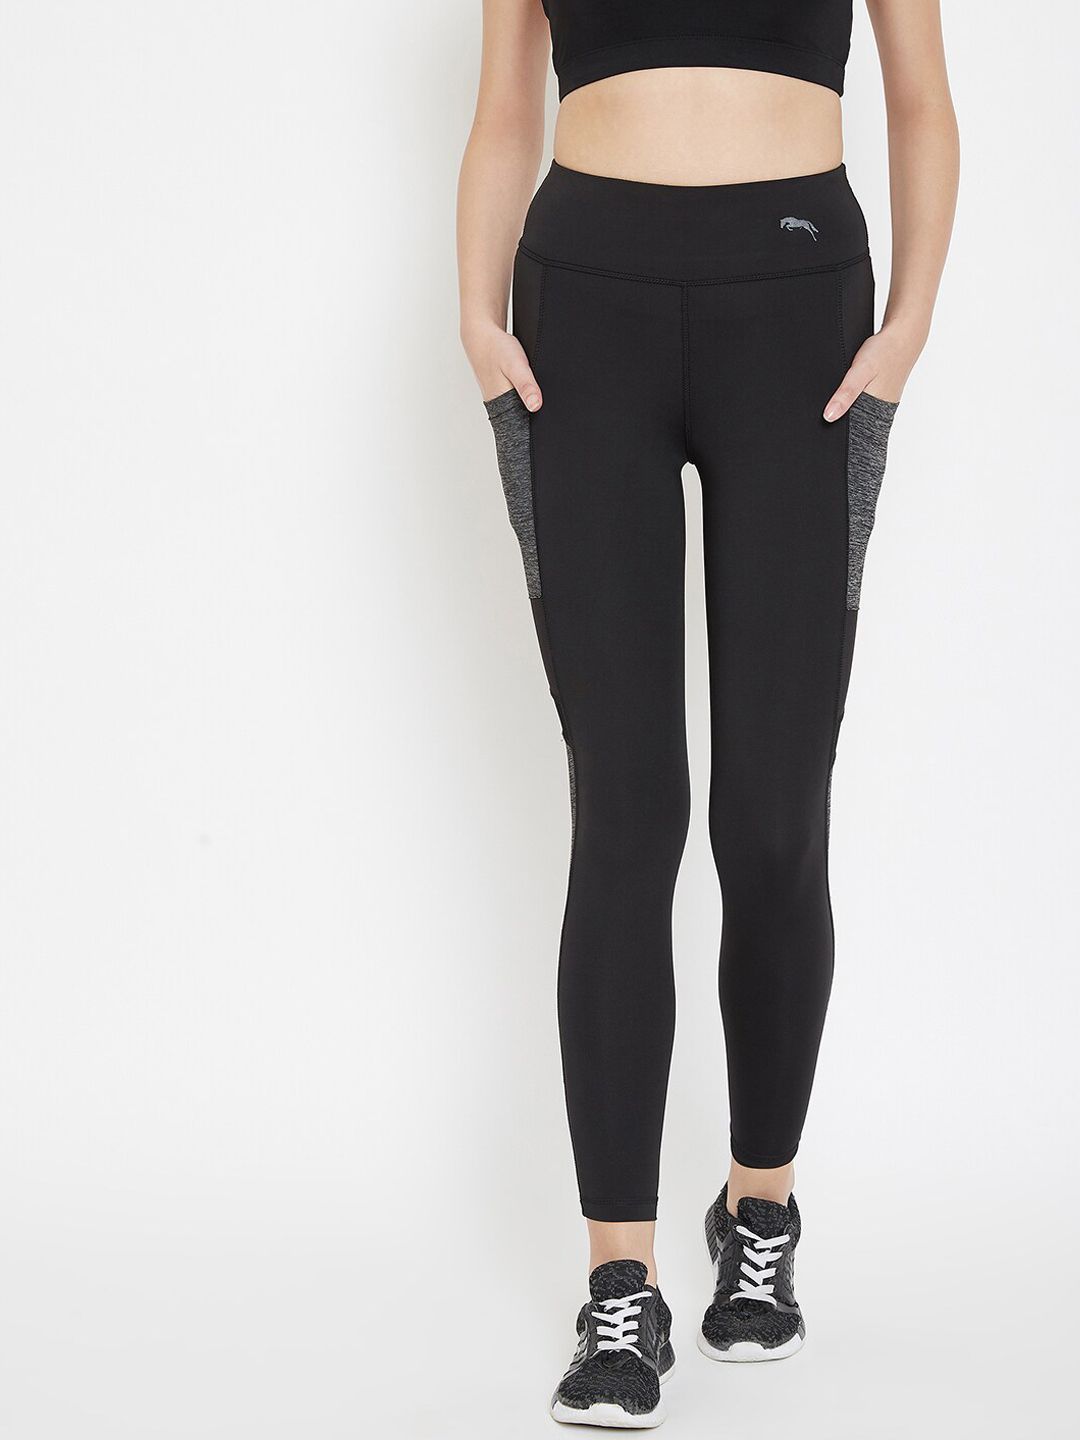 JUMP USA Women Black & Grey Colourblocked Activewear Gym Tights Price in India